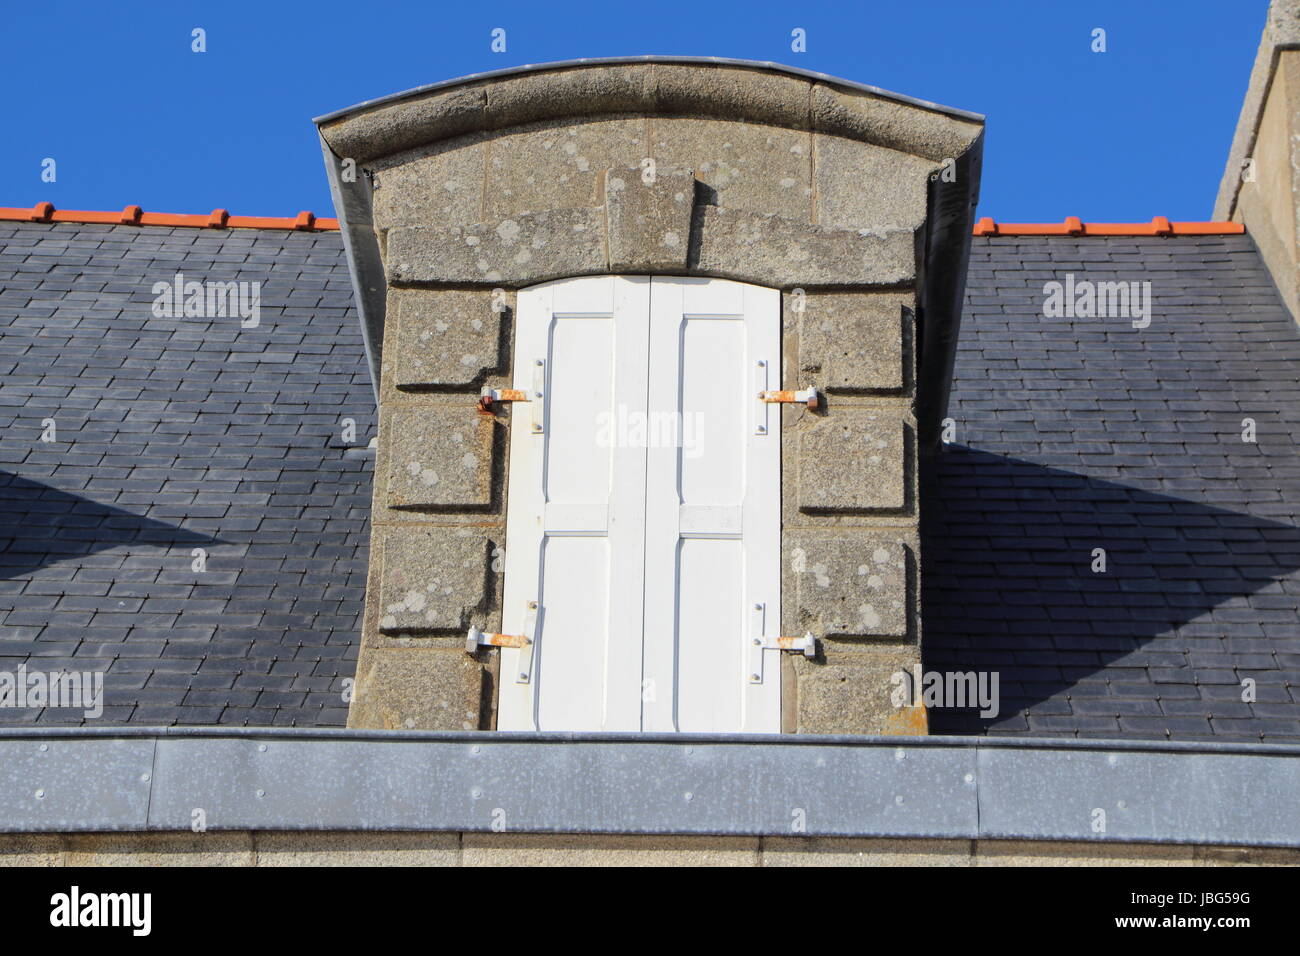 Dormer window with closed shutter Stock Photo